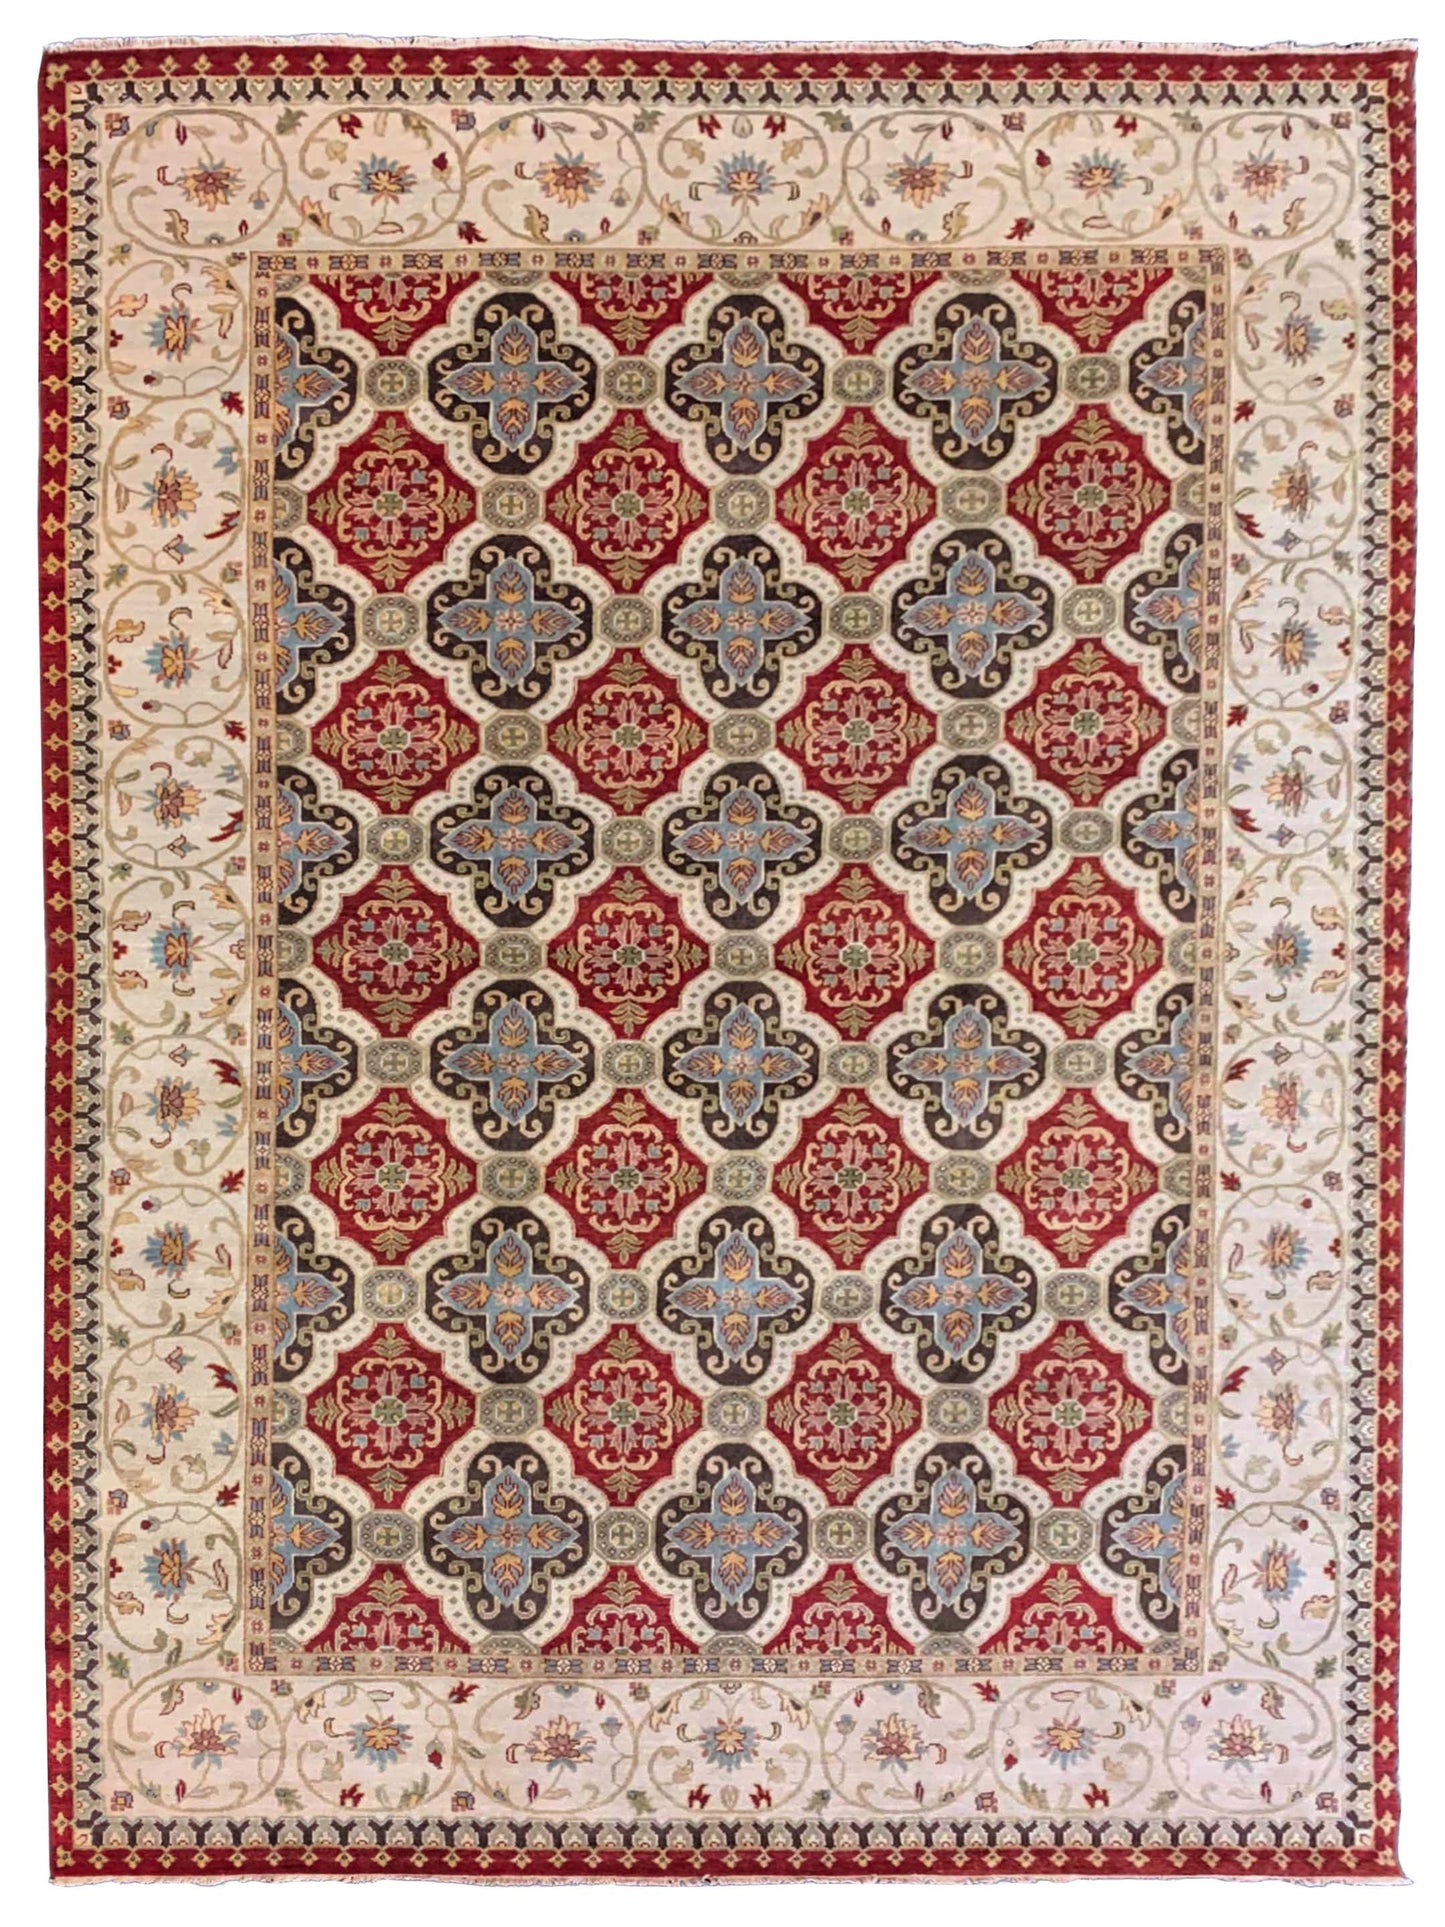 Artisan Cameron CB-202 Red Traditional Knotted Rug